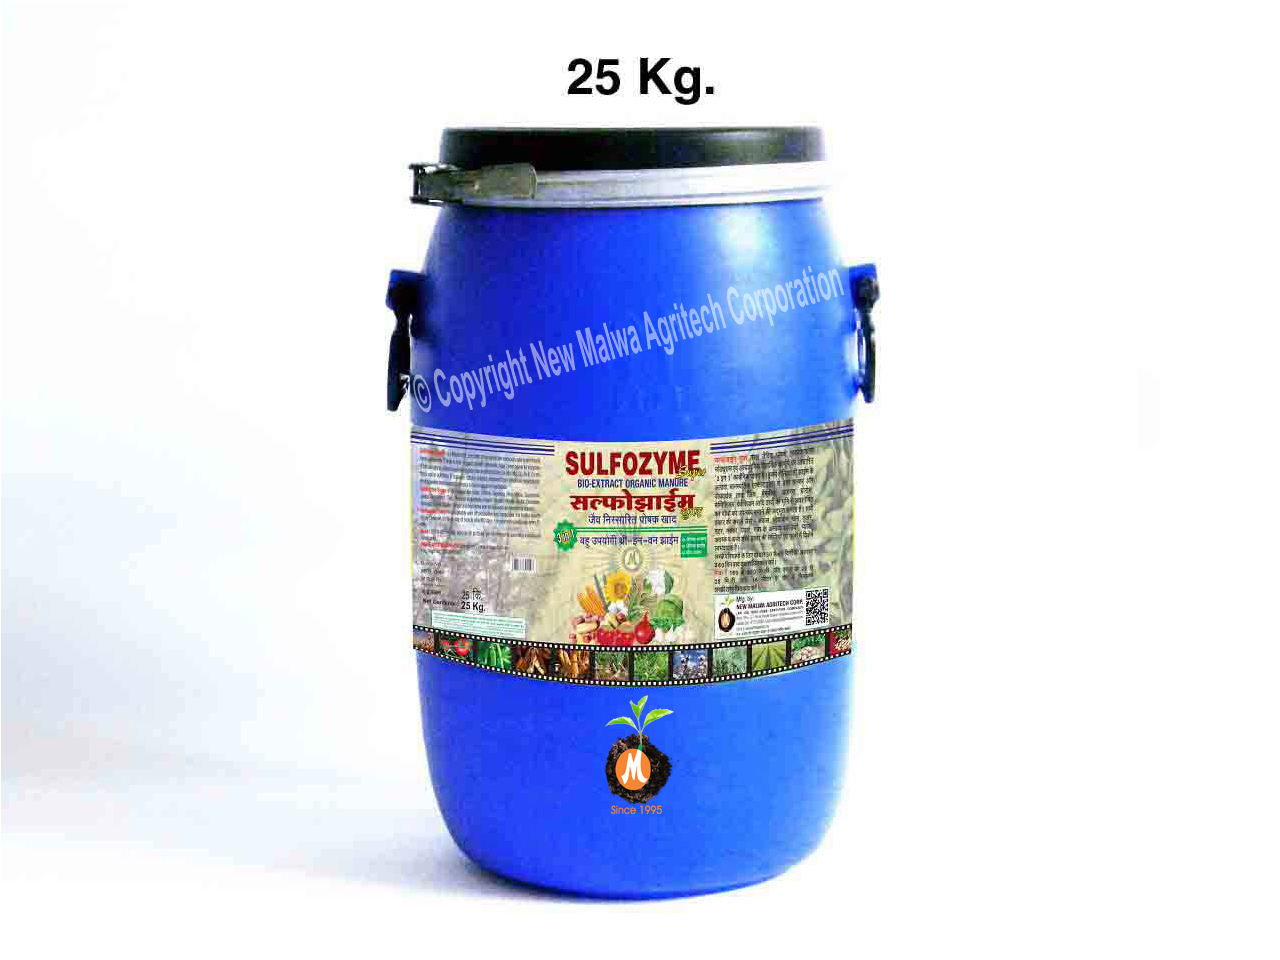 Zyme Granules in 25 kg. Drum for plants, crops and vegetables